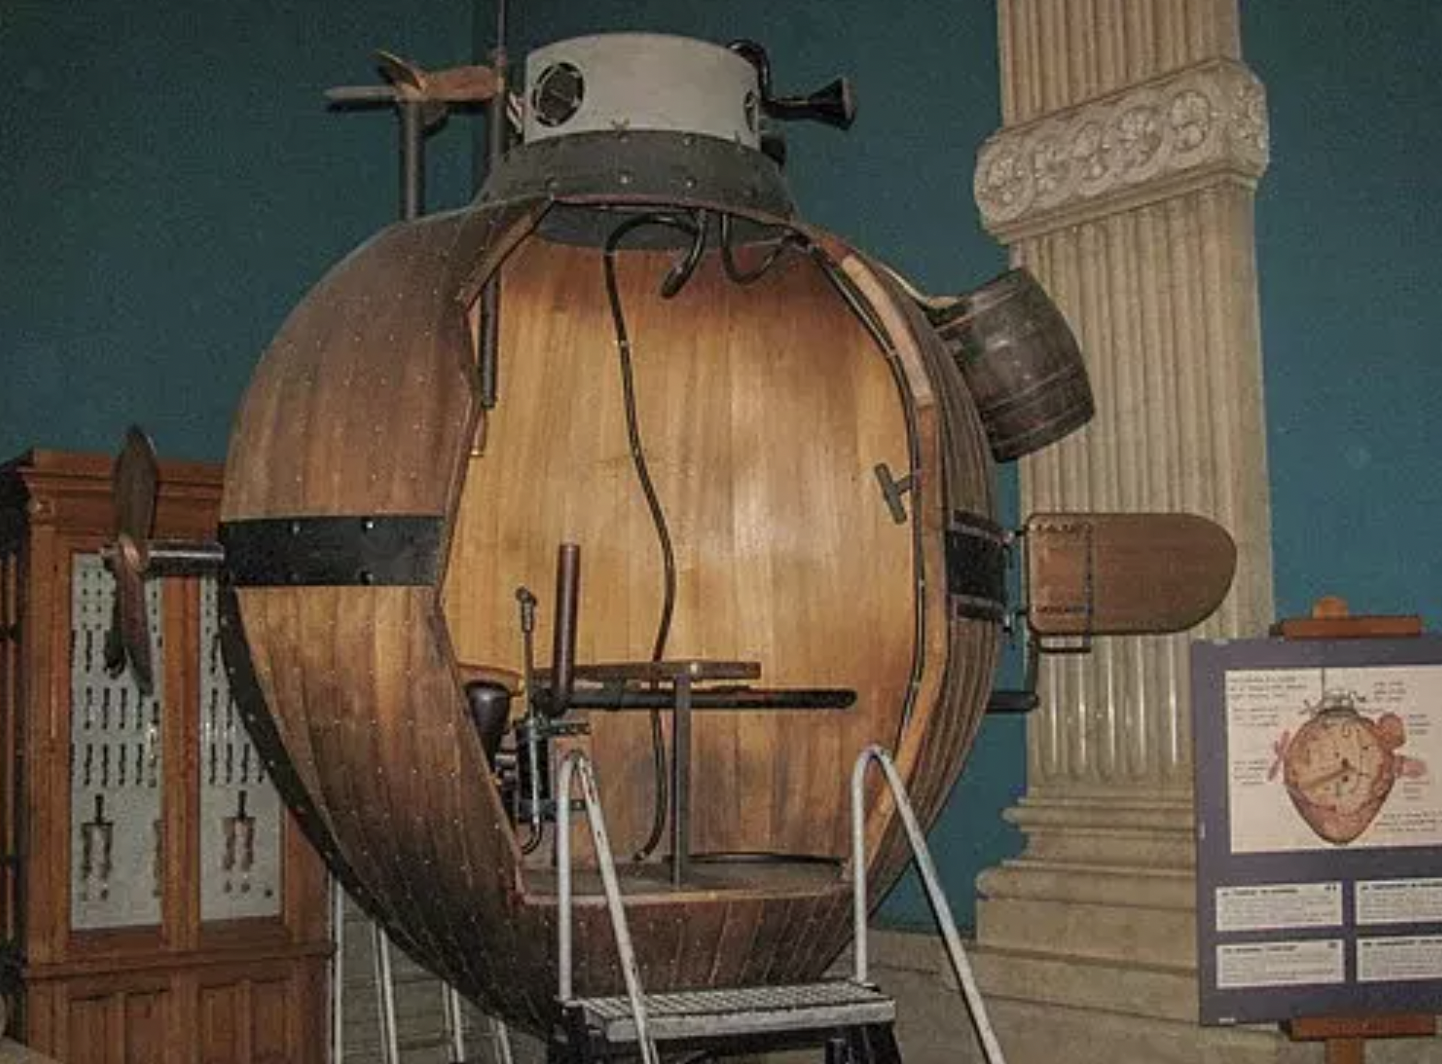 Recognizing that fully functioning submarine might not happen in his lifetime, da Vinci tried his hand at a submersible shell. Looking more like a hand grenade than anything else, the design is similar to early submersibles that were actually built. Still, what does going down in this thing really accomplish?